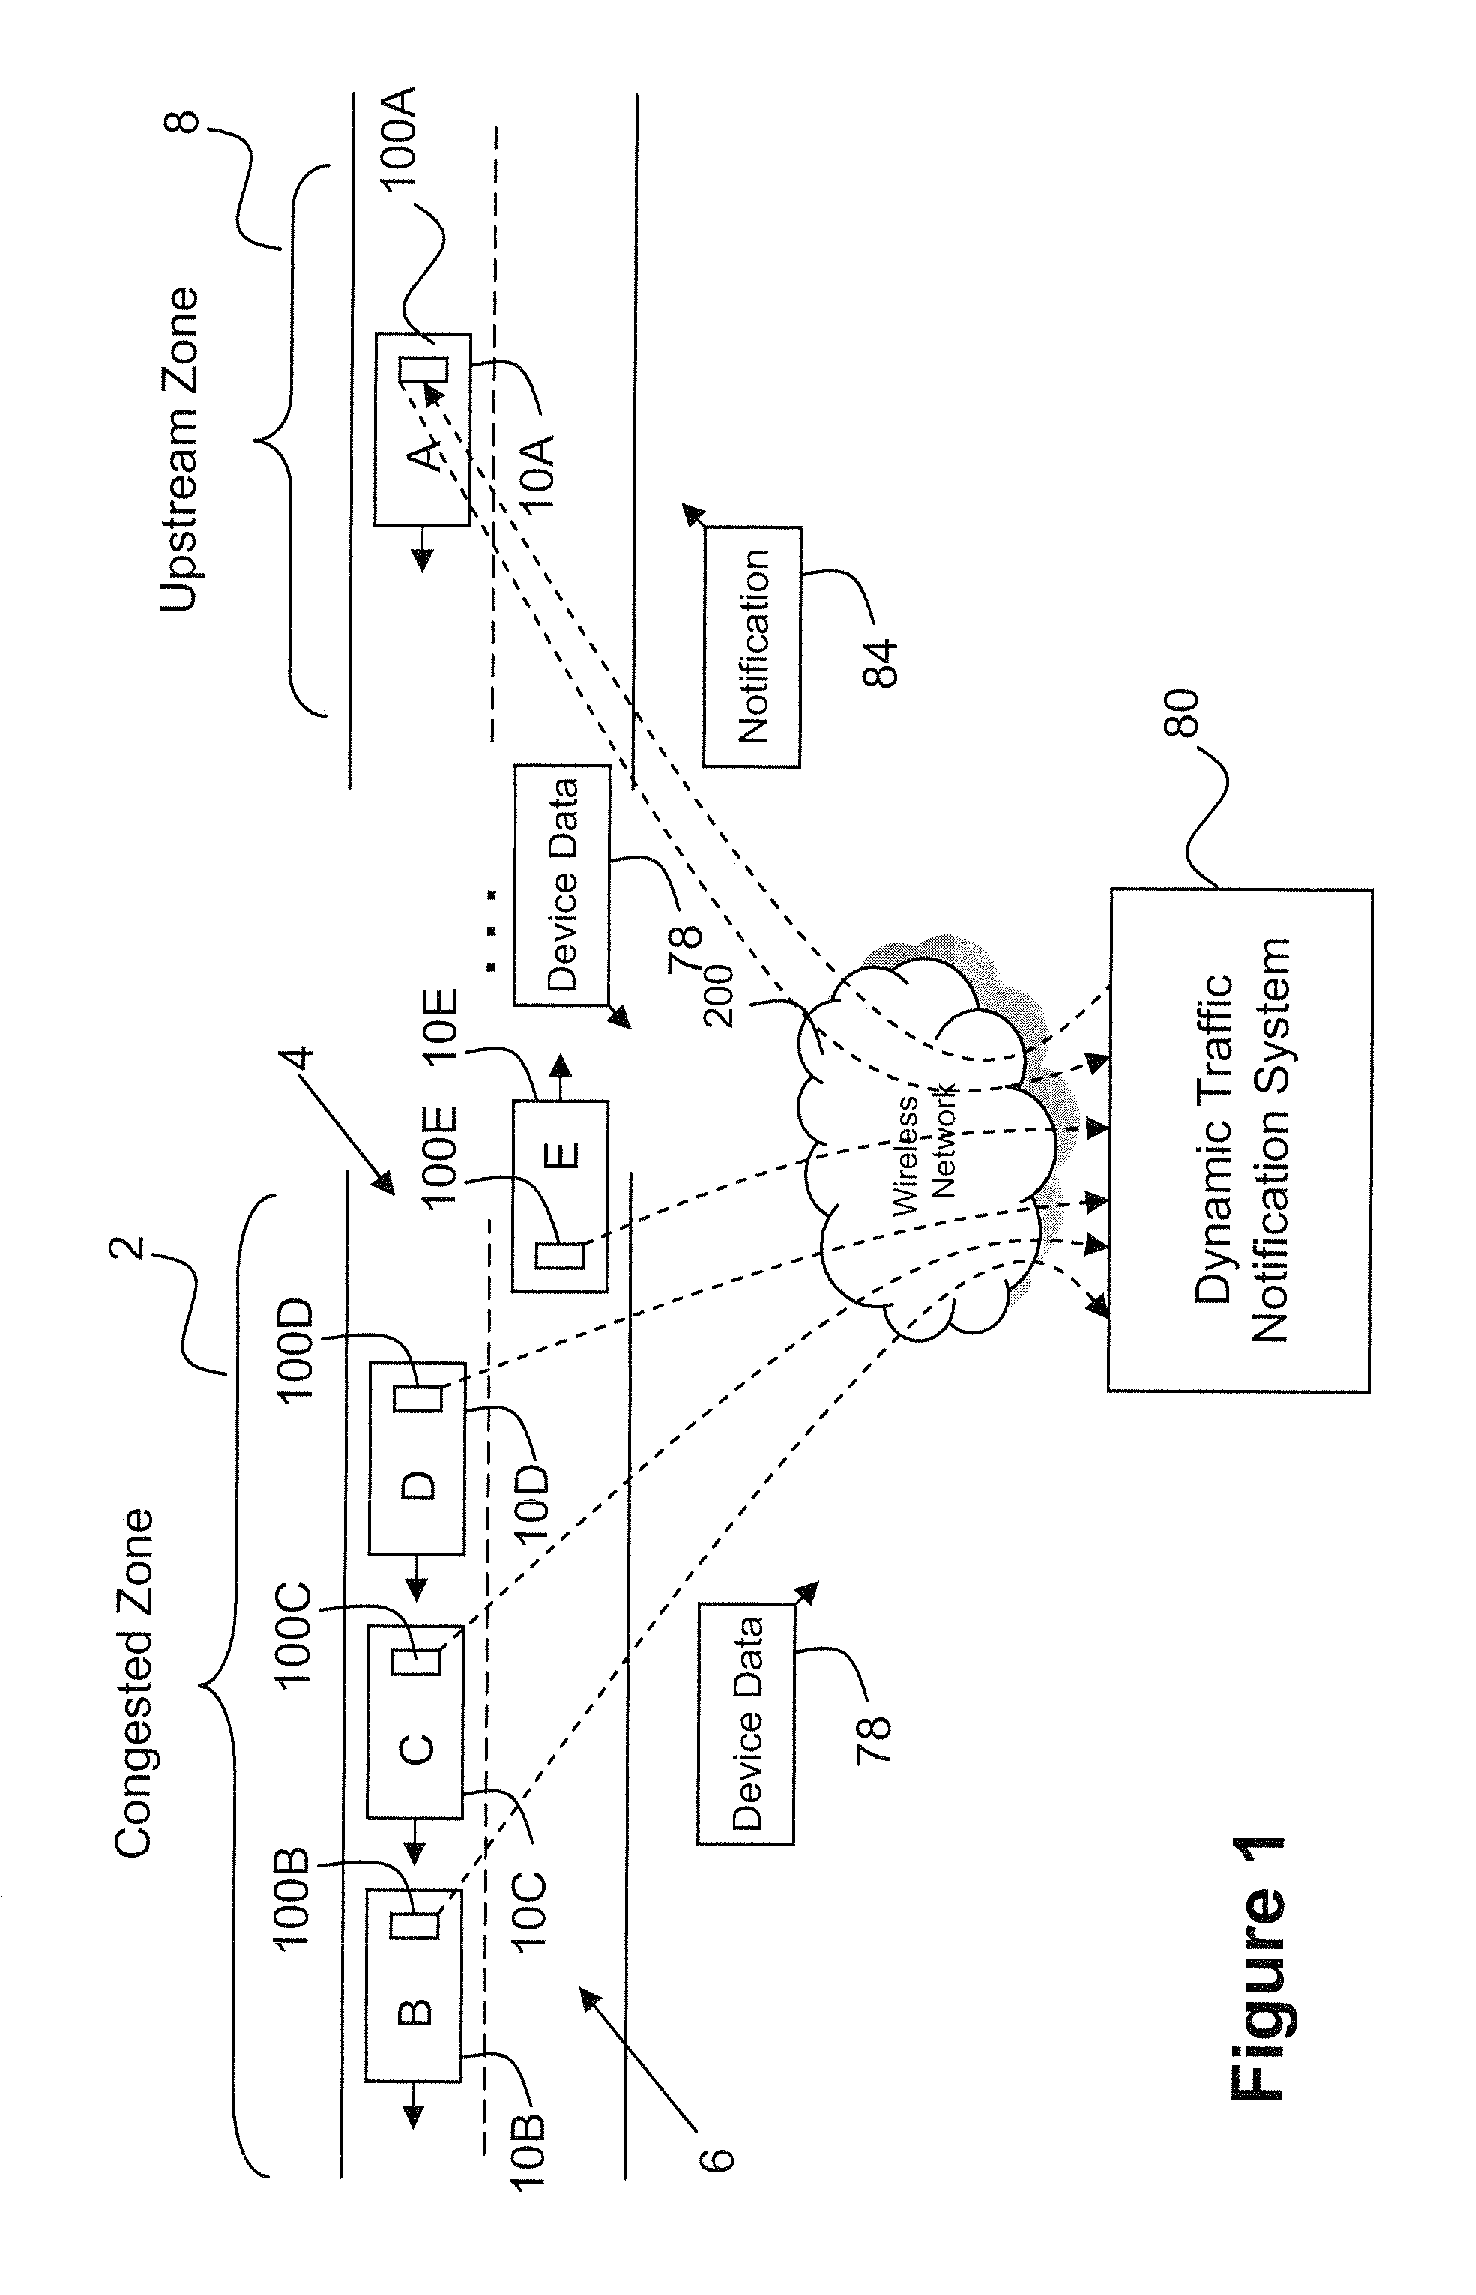 System and method of representing route information